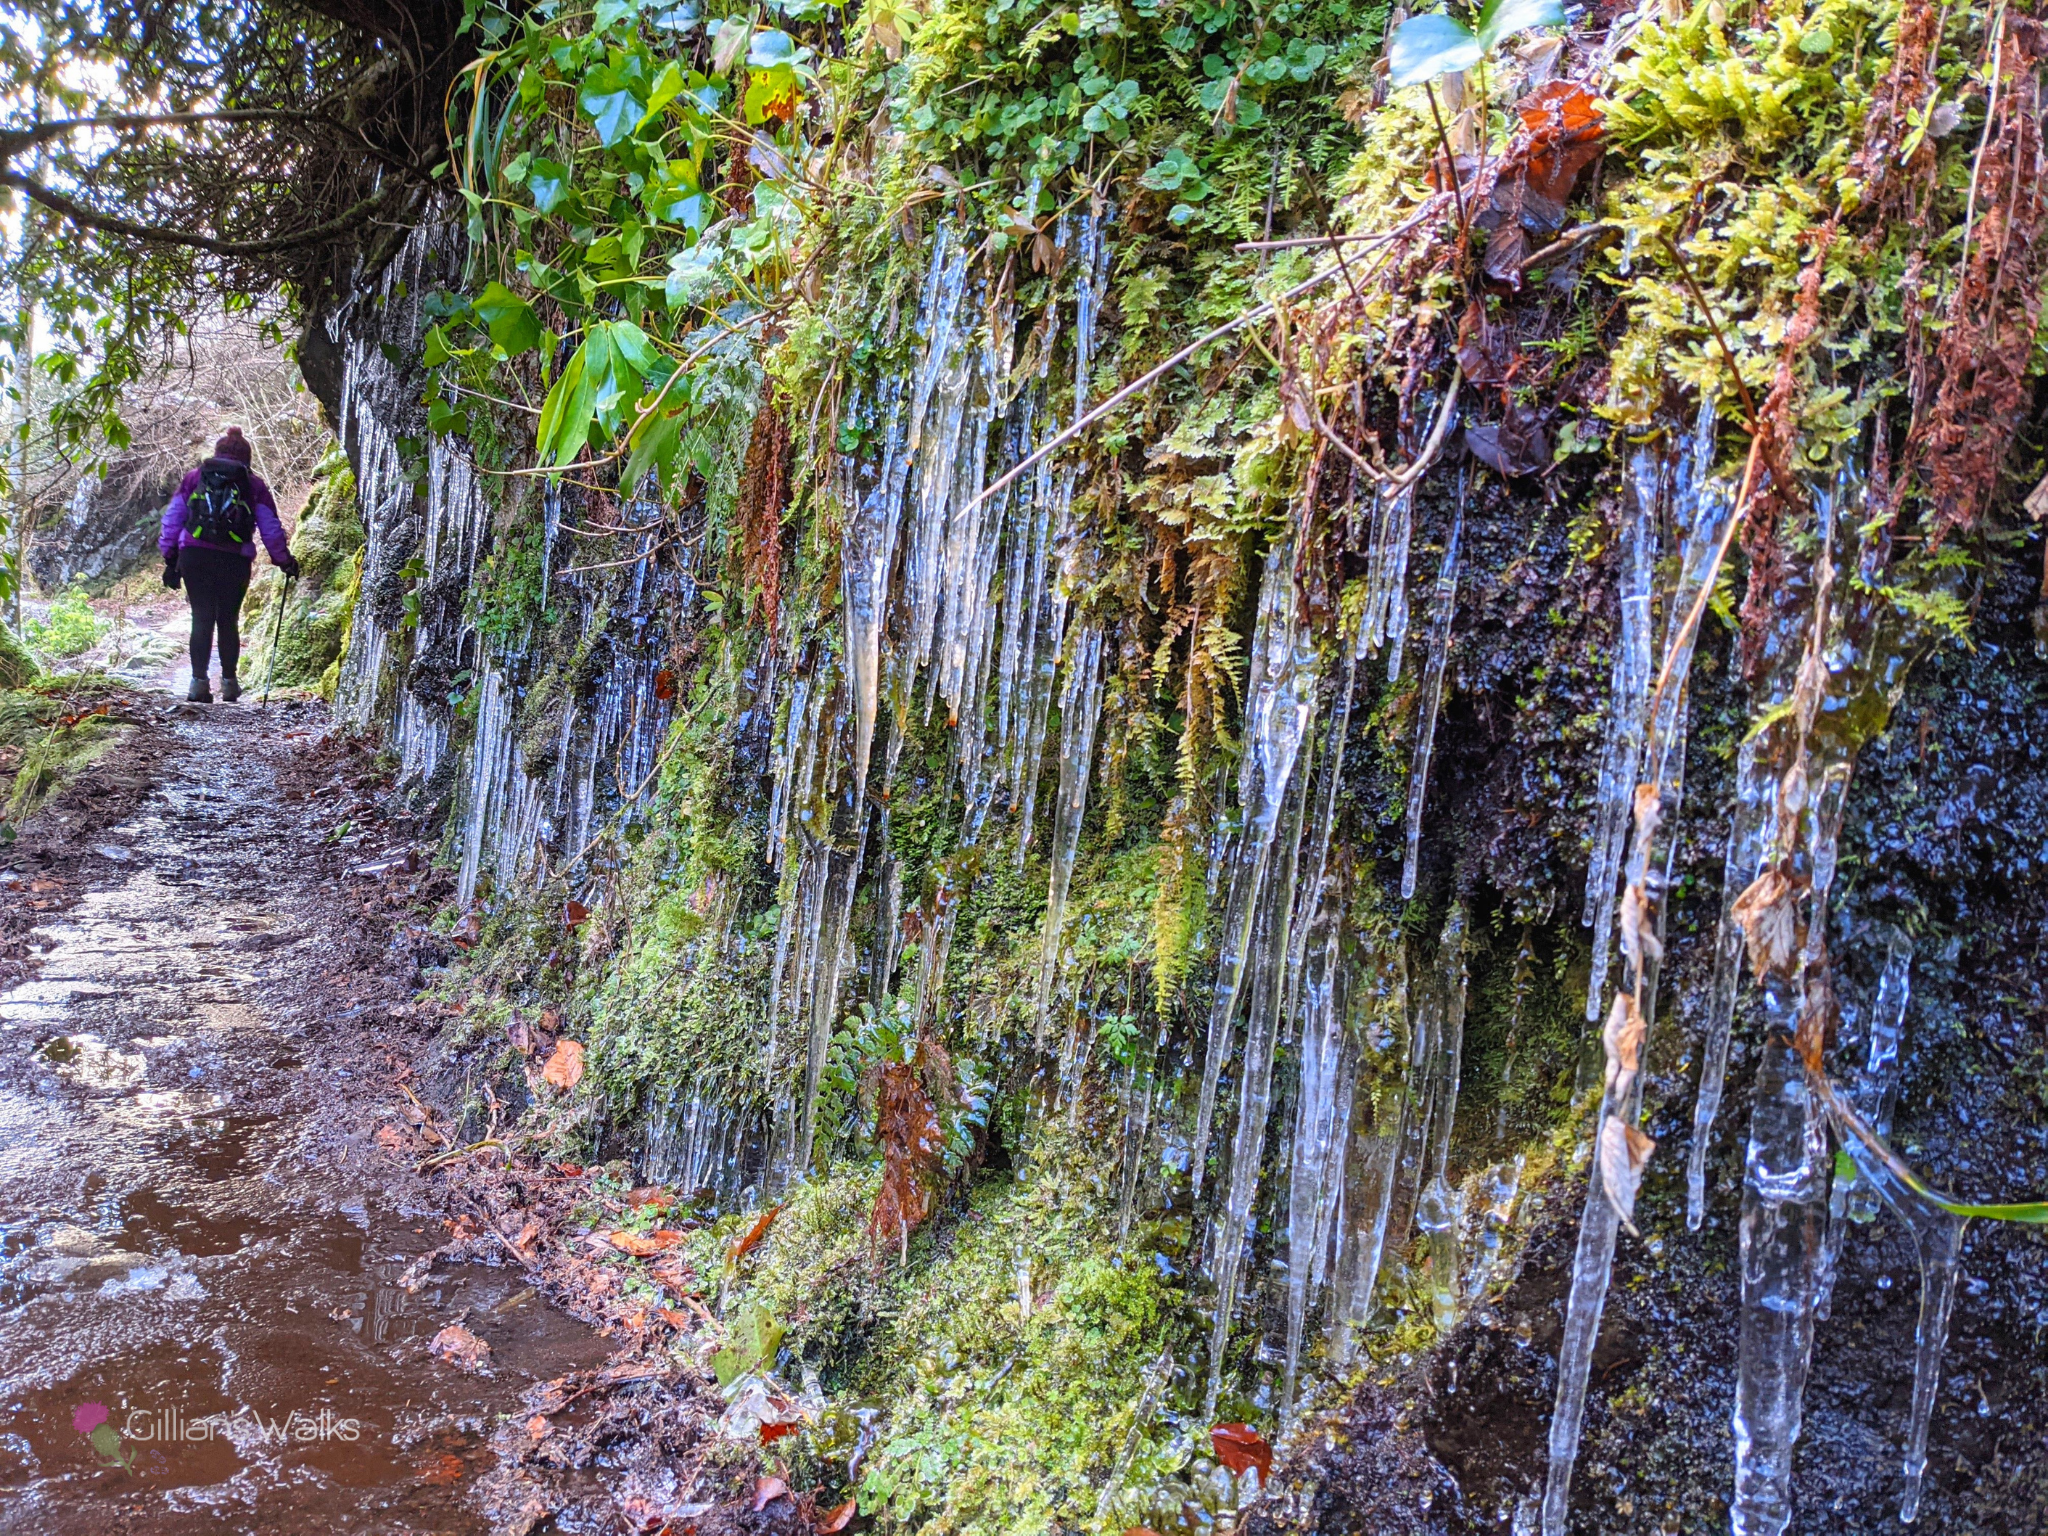 Long icicles clinging to moss-covered rocks beside a wet and muddy footpath. My mum is walking on the footpath supported by a walking pole.